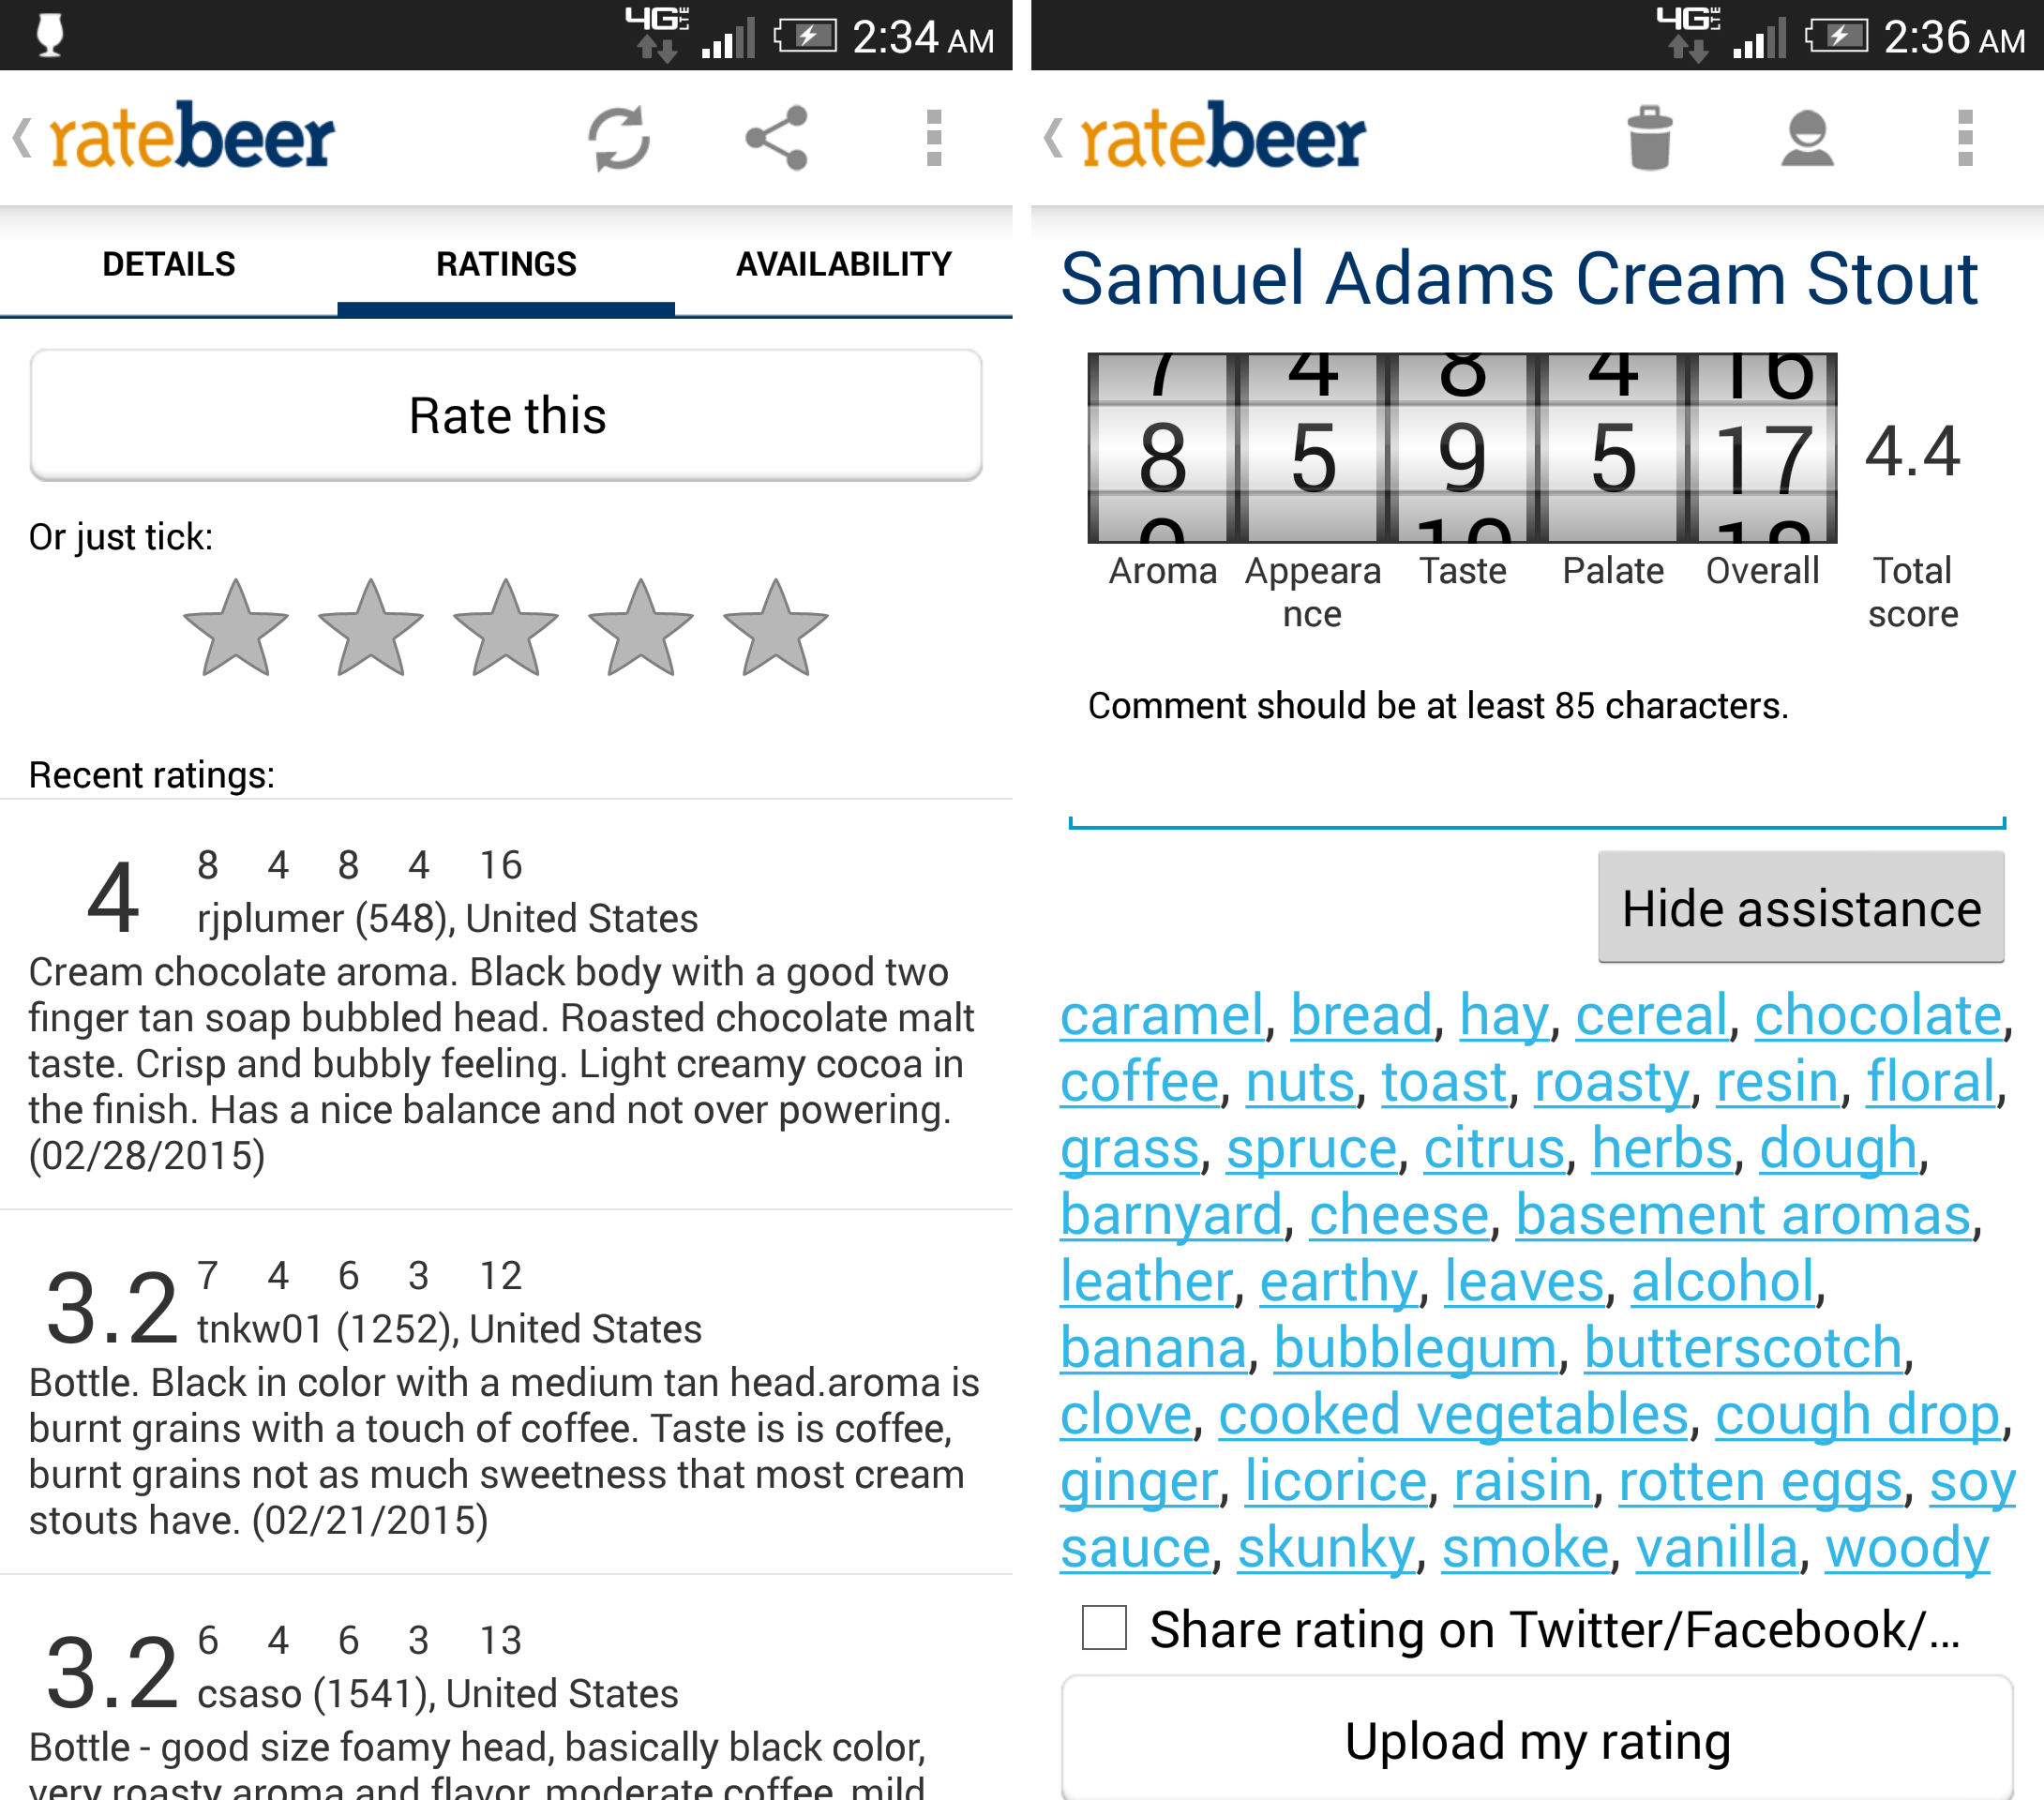 Screenshots showing the rating process on RateBeer